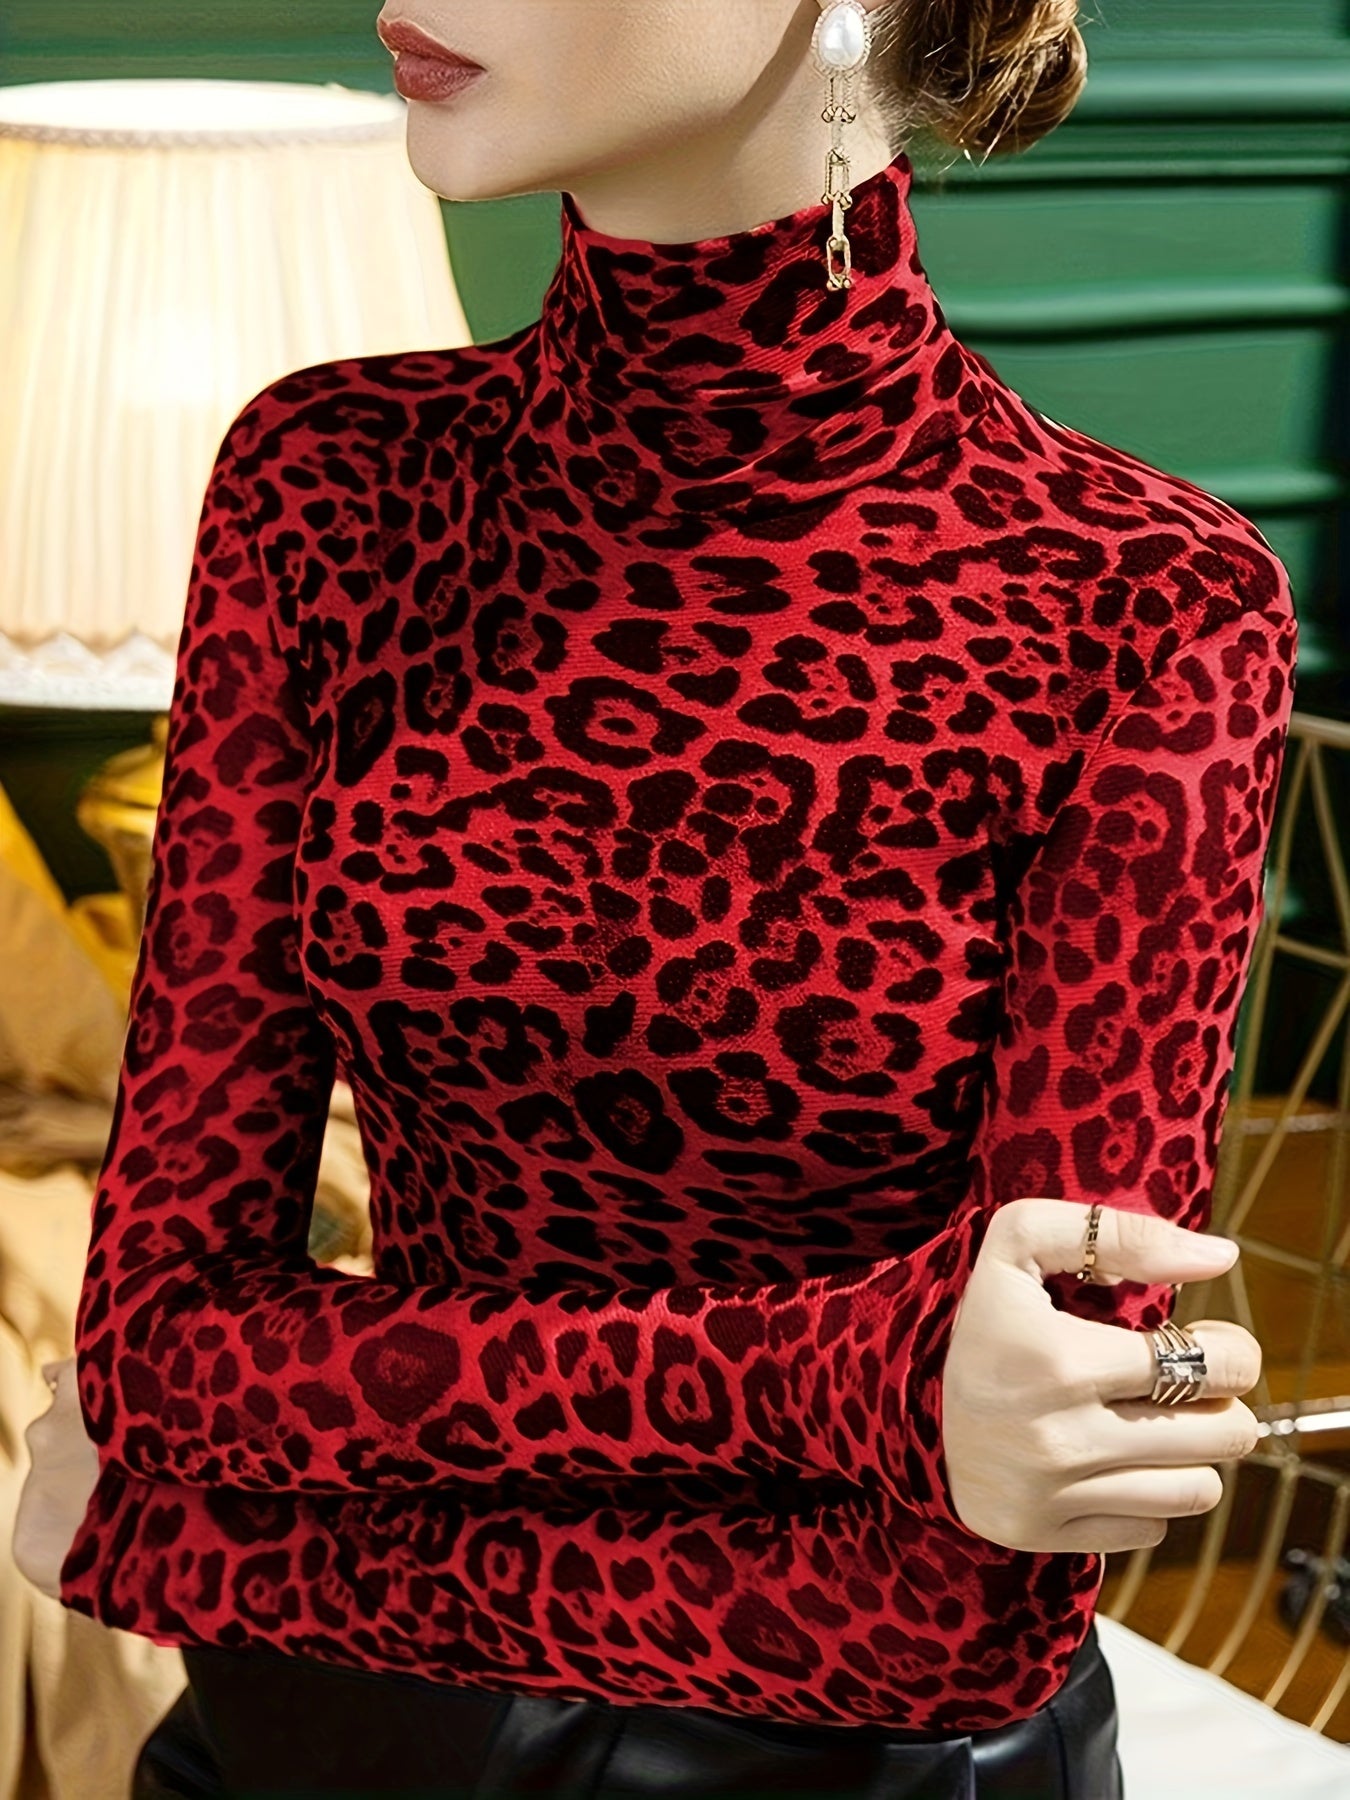 Leopard Print Turtleneck T-Shirt, Casual Long Sleeve Top For Spring & Fall, Women's Clothing